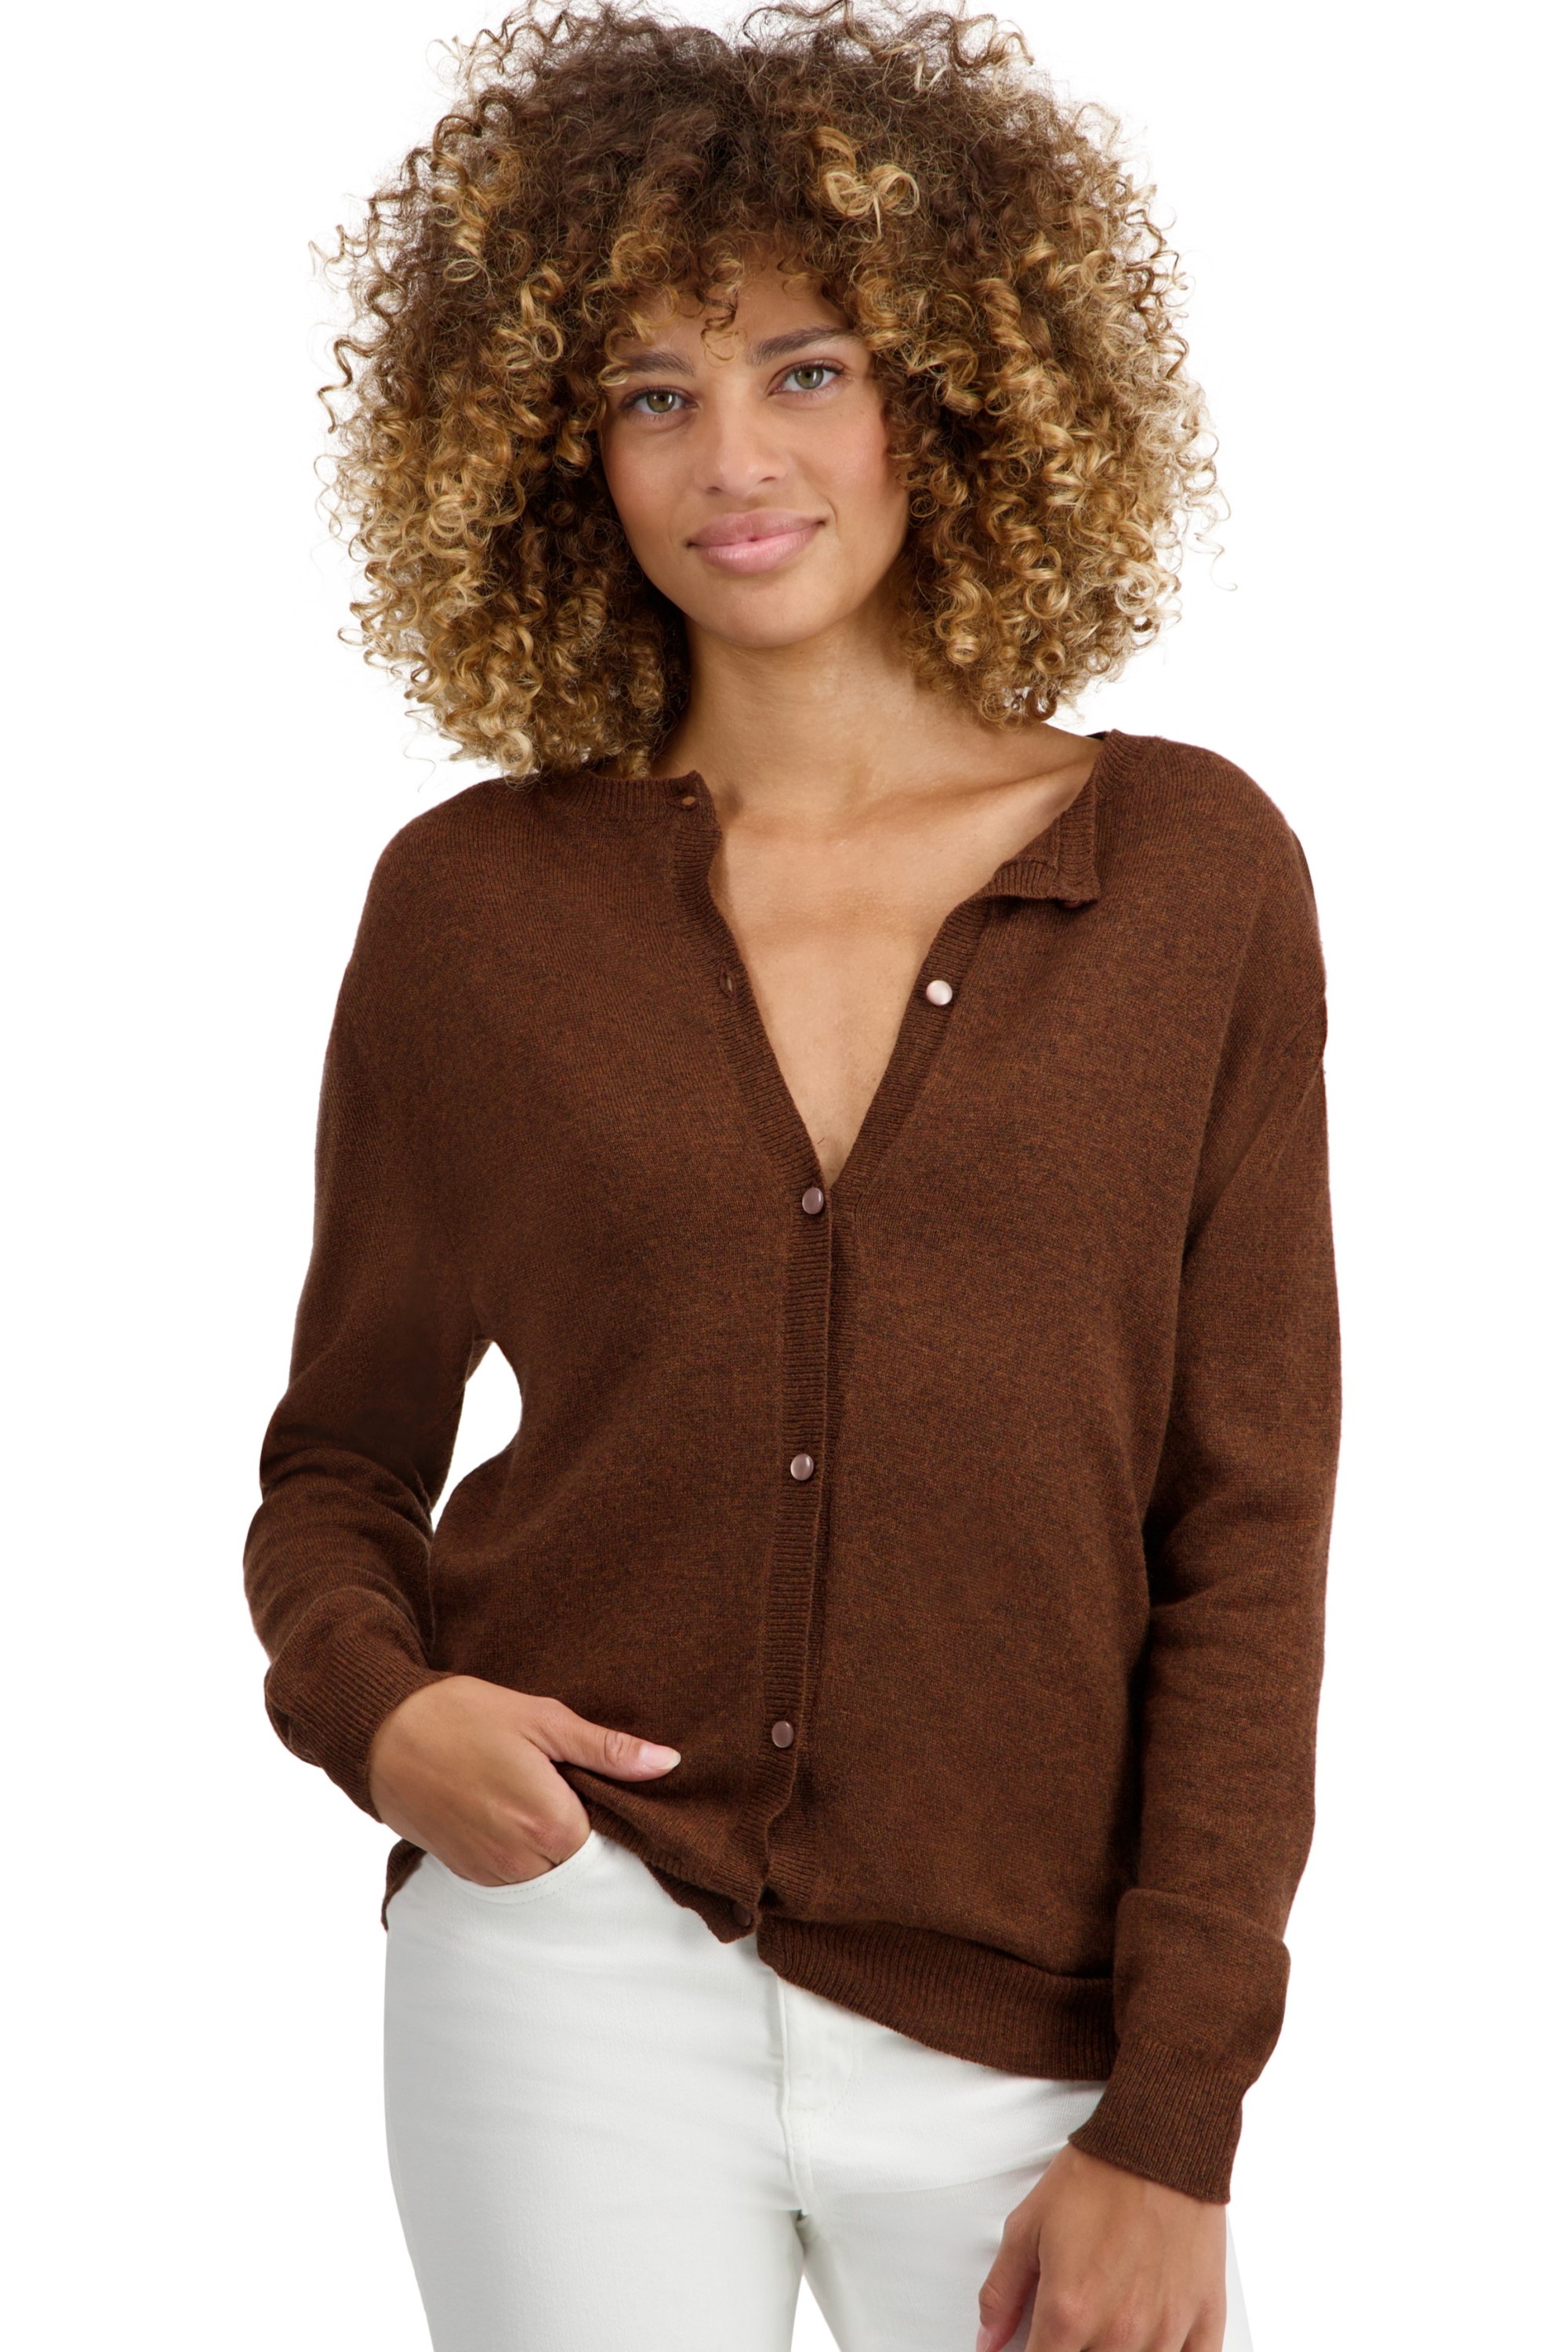 Cashmere ladies basic sweaters at low prices tyra first mace m